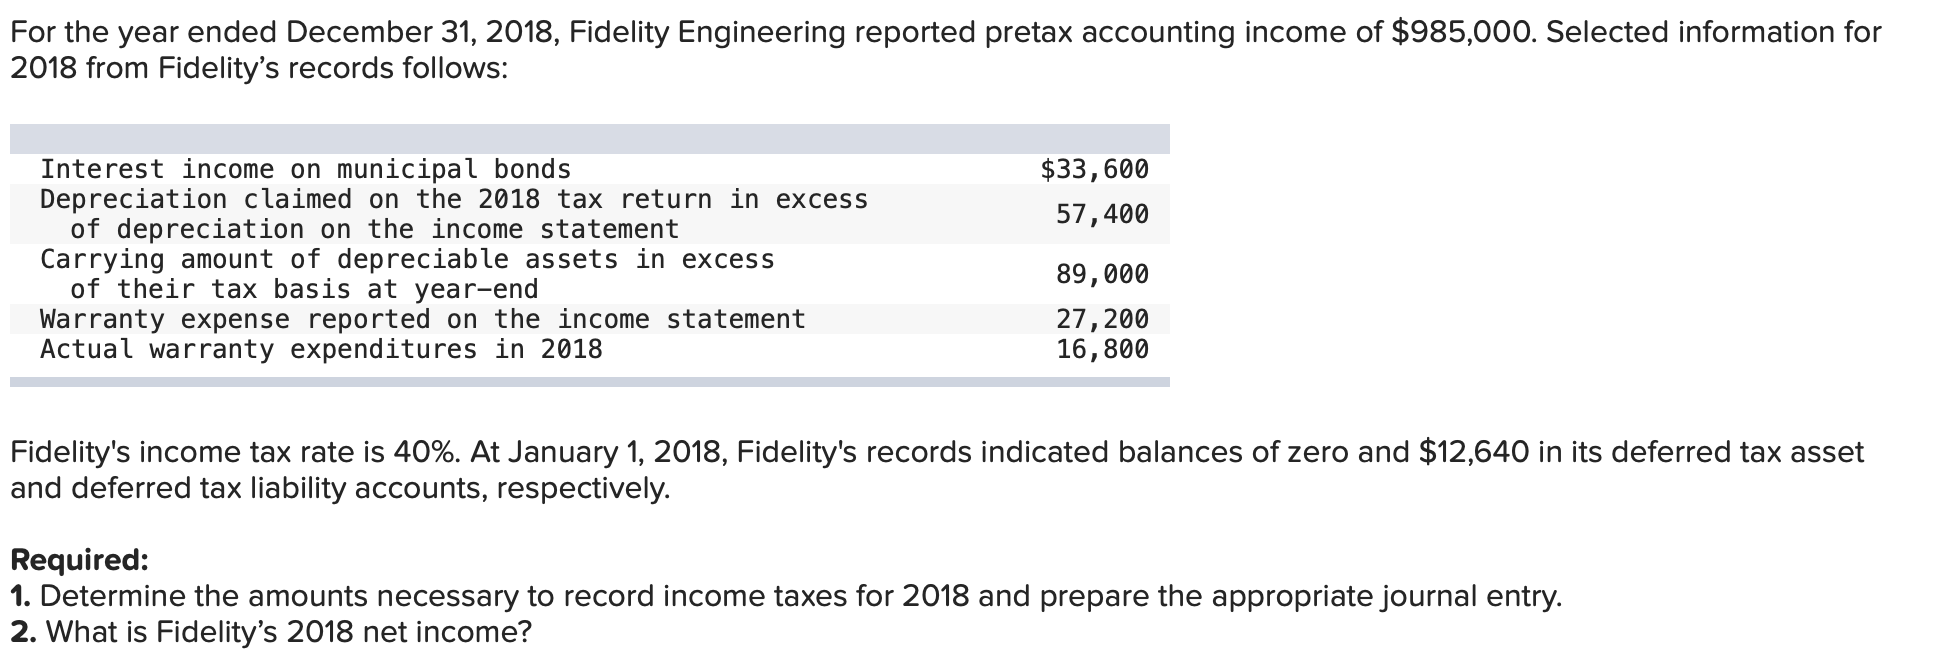 For the year ended December 31, 2018, Fidelity Engineering reported pretax accounting income of $985,000. Selected informatio